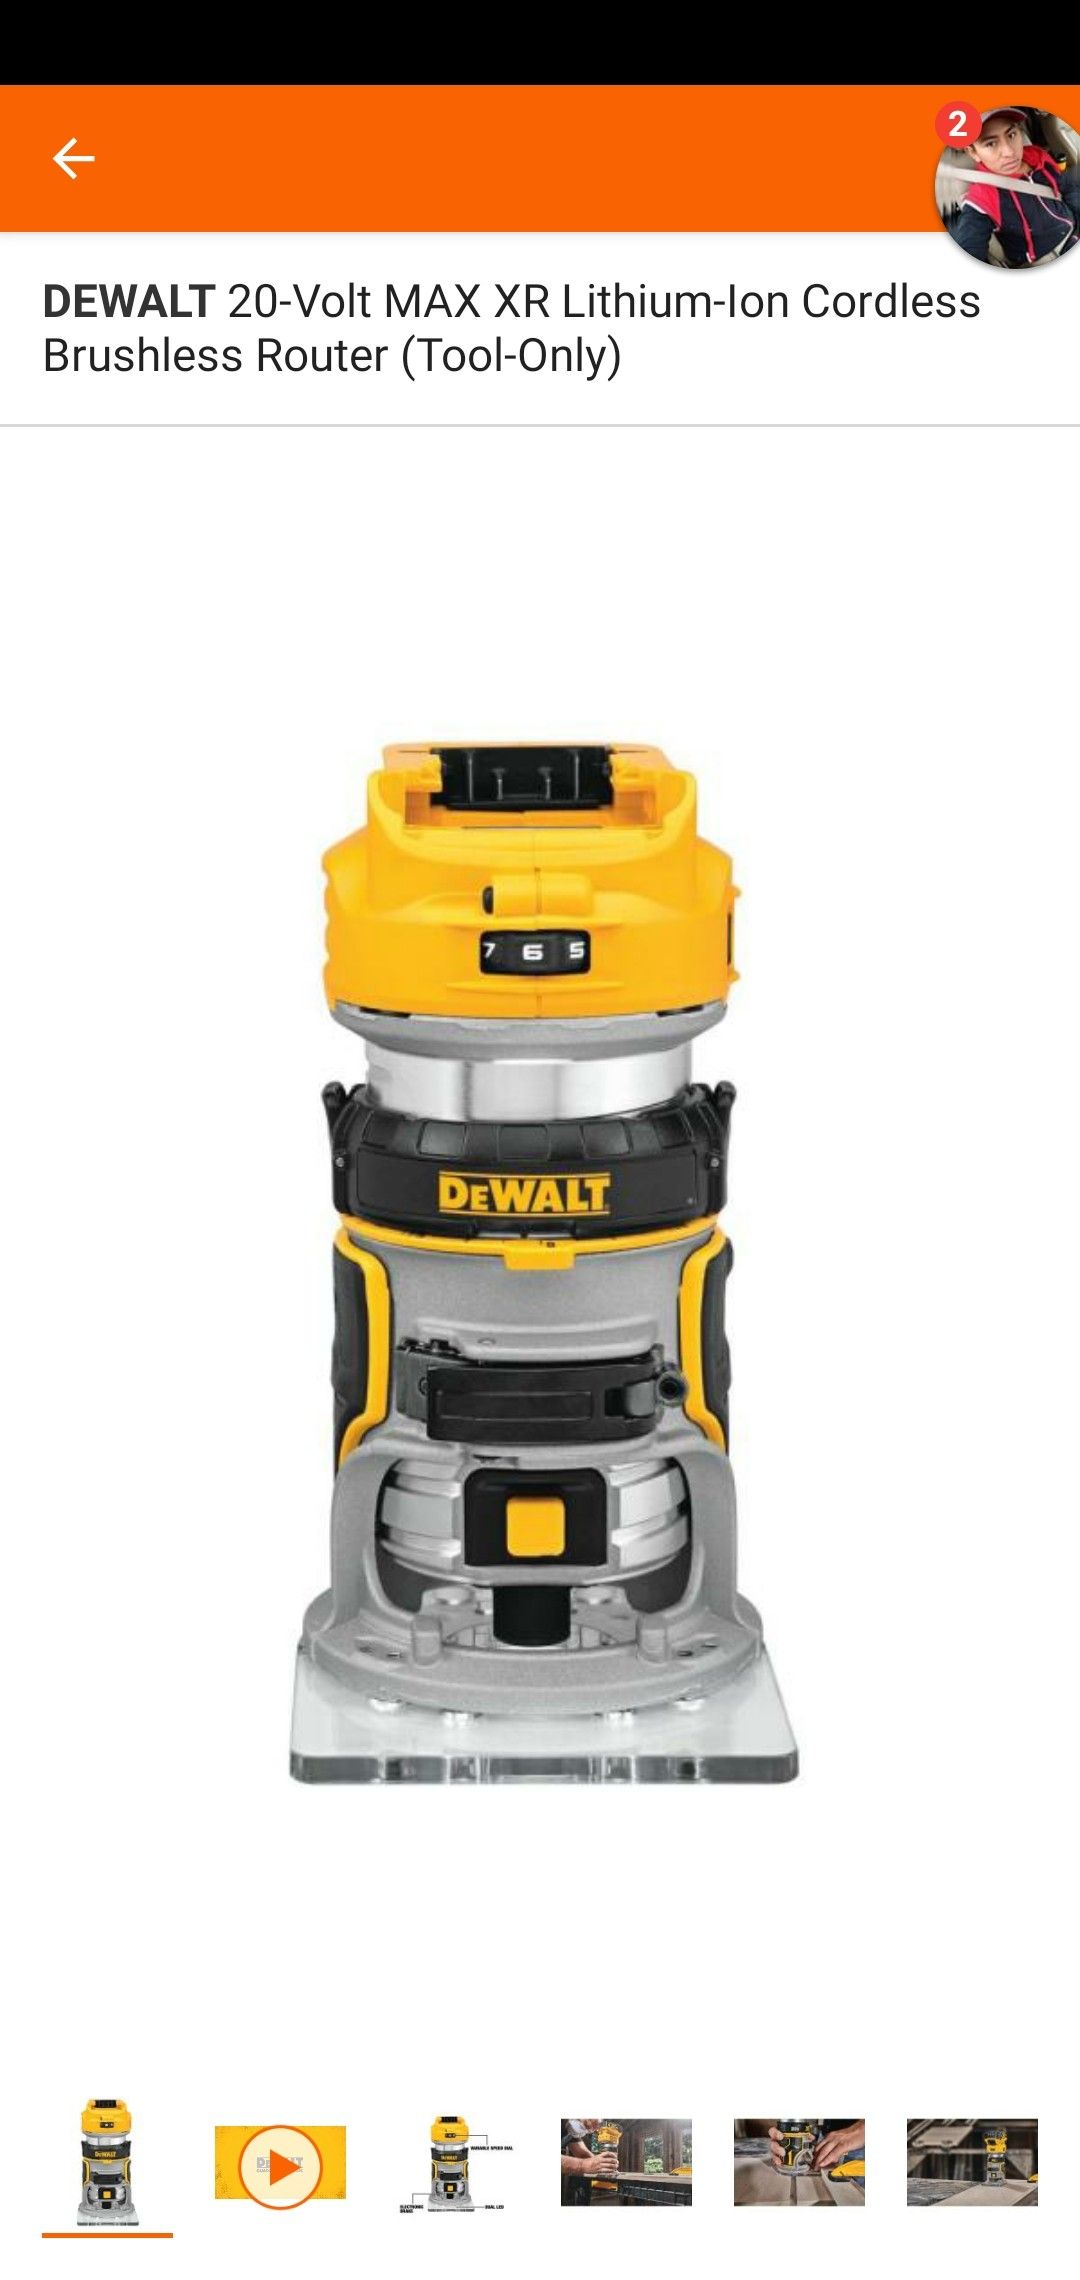 DEWALT 20-Volt MAX XR Lithium-Ion Cordless Brushless Router (Tool-Only)